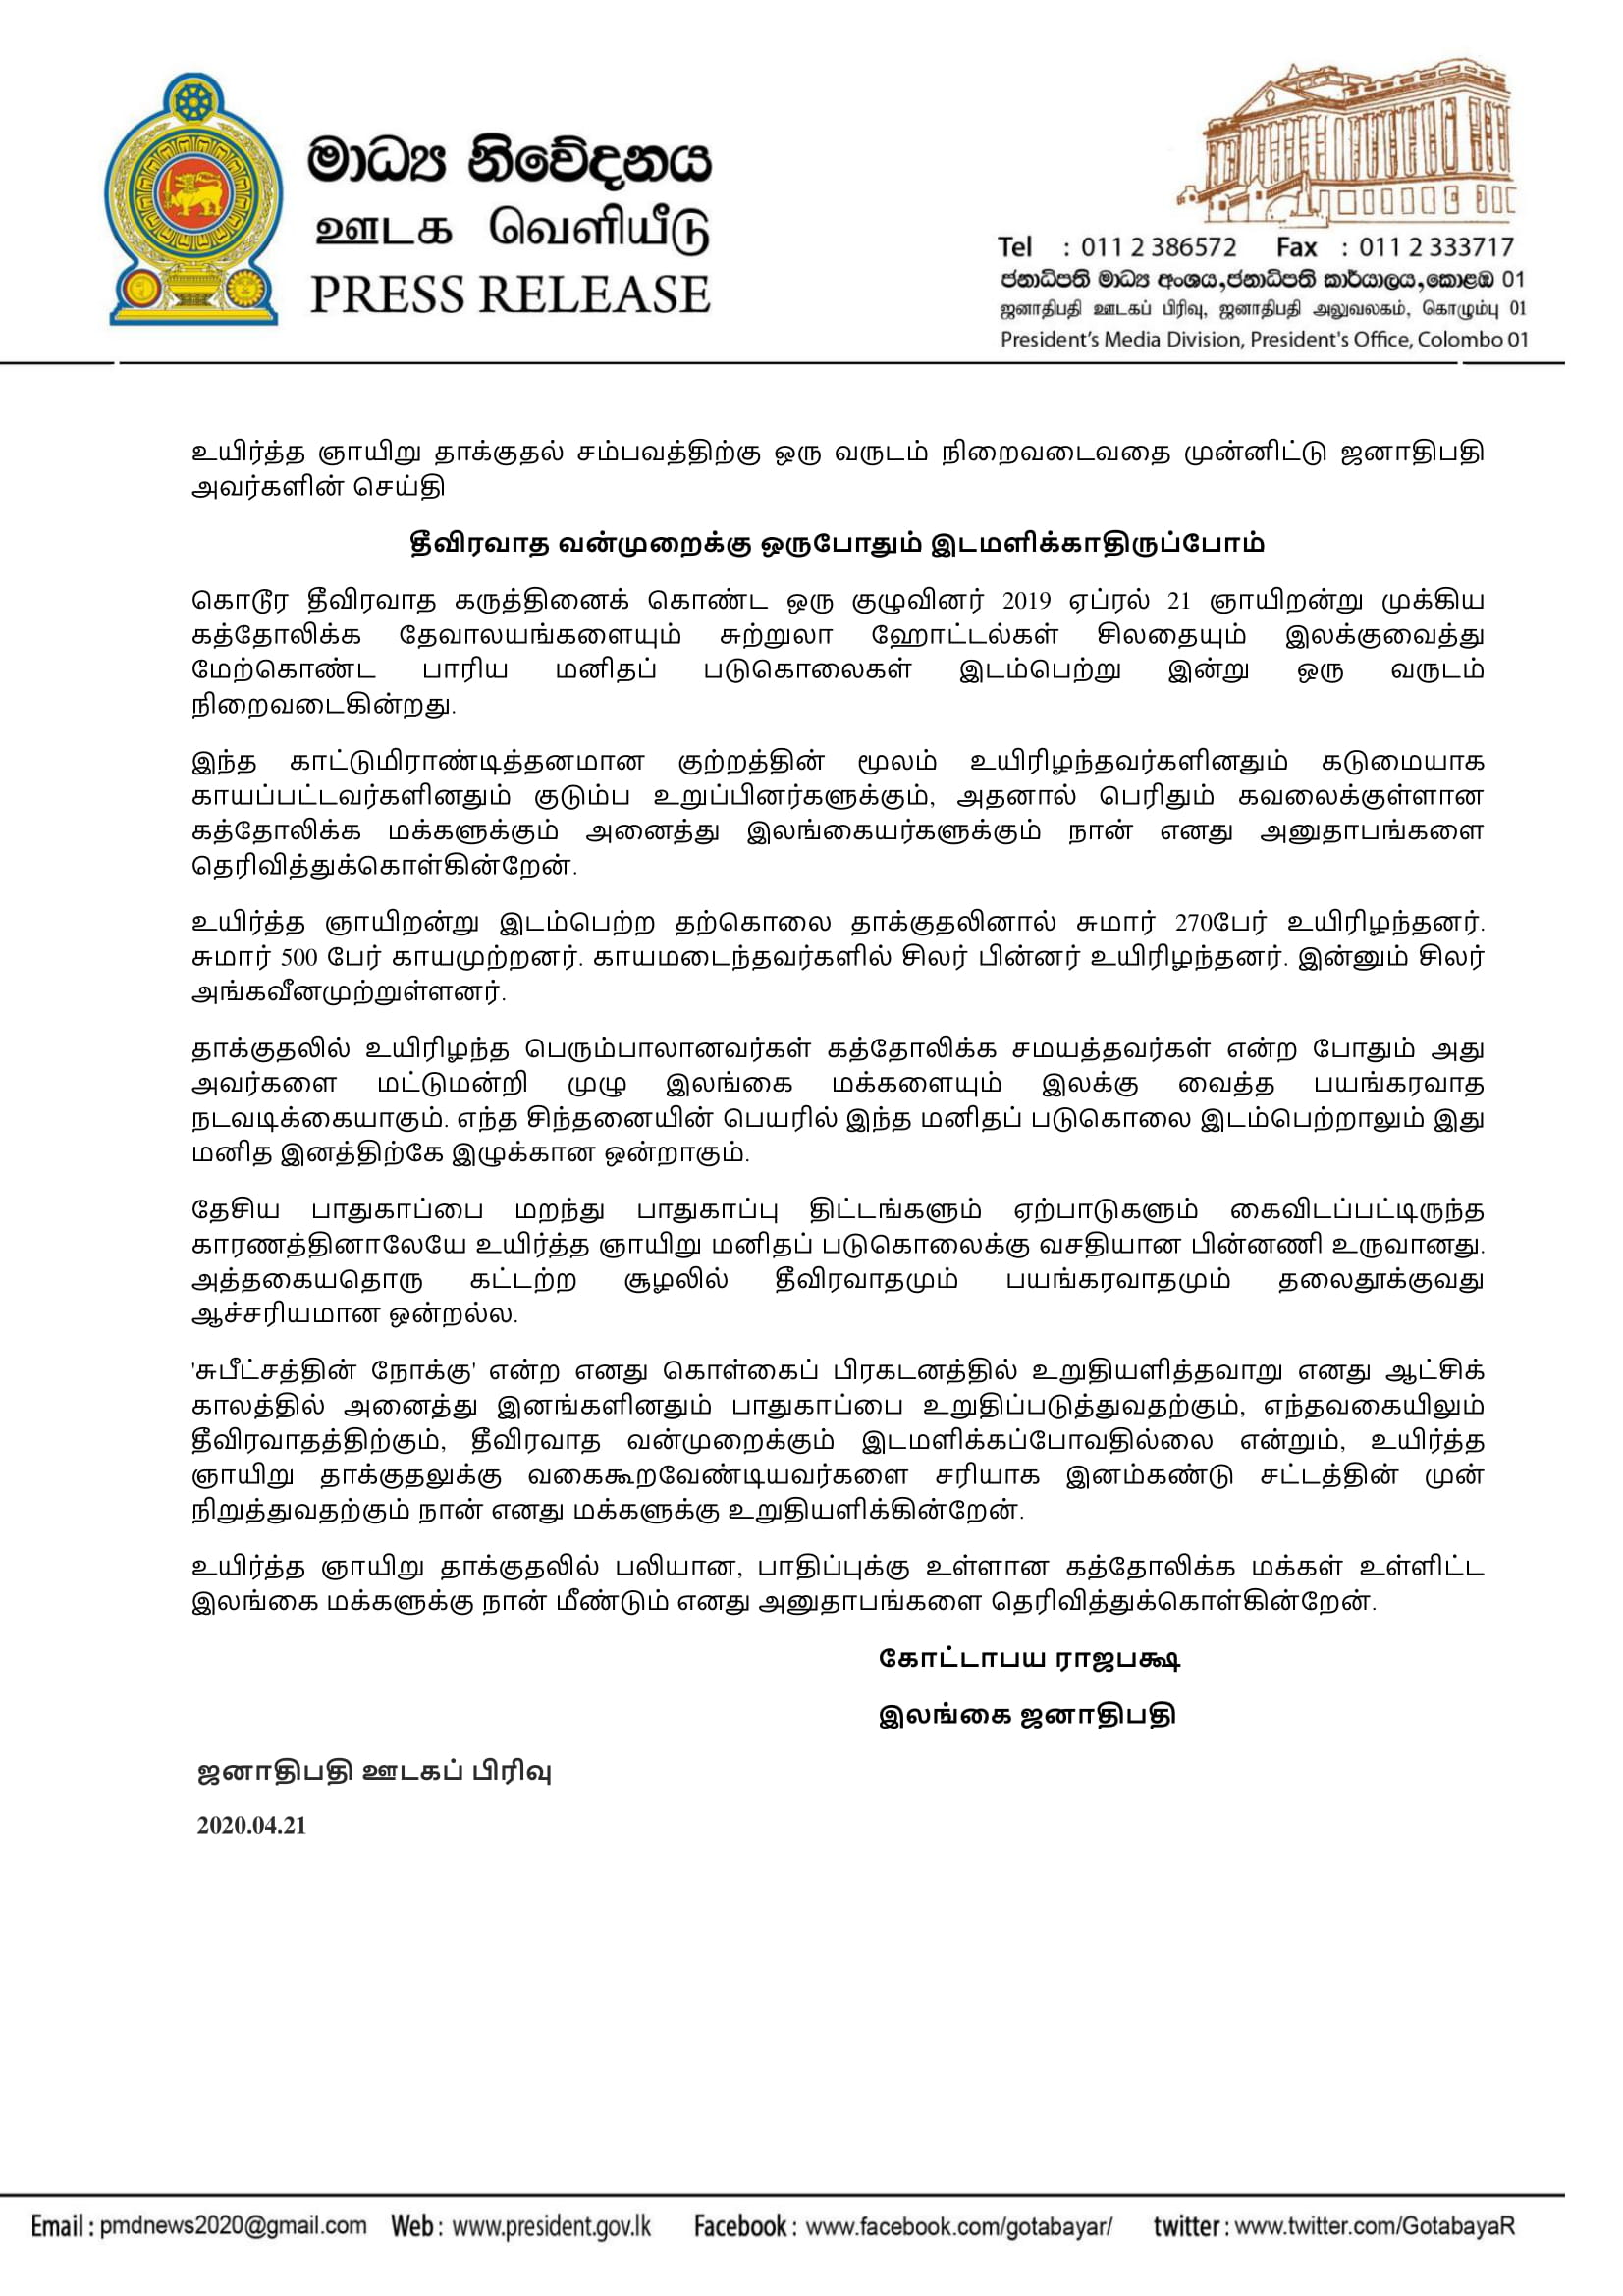 Tamil - President's message on one year compltion of Easter Sunday carnage ) 21.04.2020-1